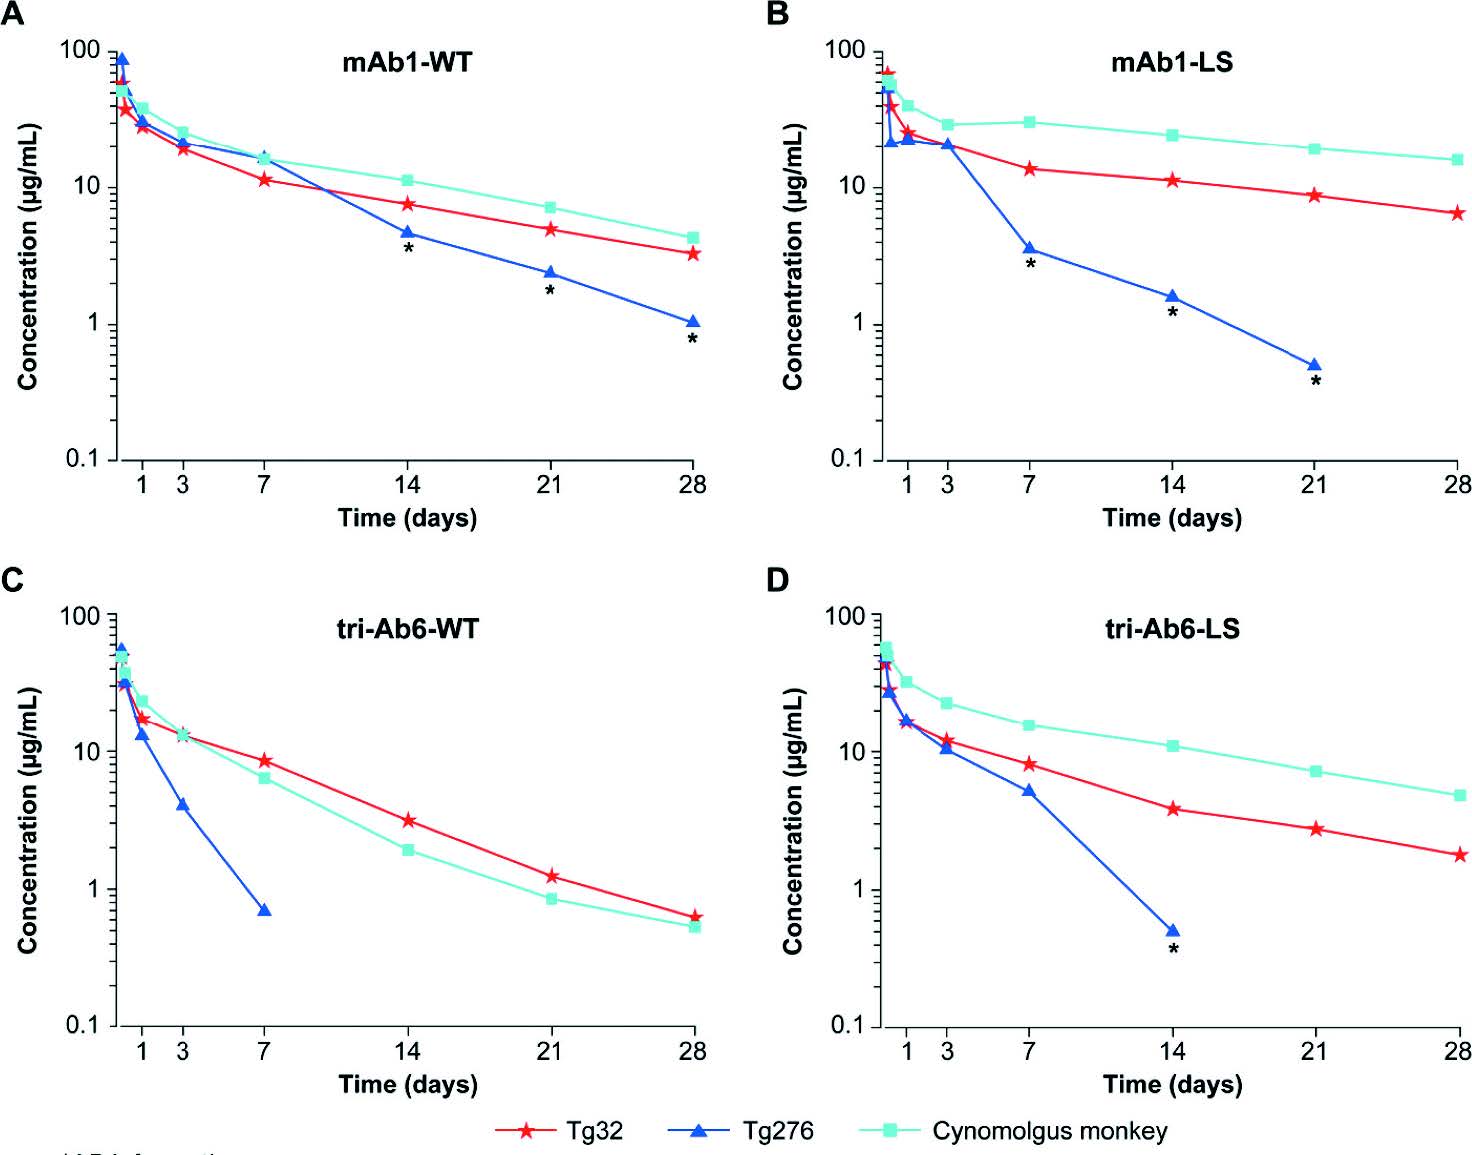 Comparison of pharmacokinetic profiles in cynomolgus monkeys and homozygous Tg32 and Tg276 mice following administration of (a) mAb1-WT or (b) with the LS mutation; (c) tri-Ab6-WT or (d) with the LS mutation.